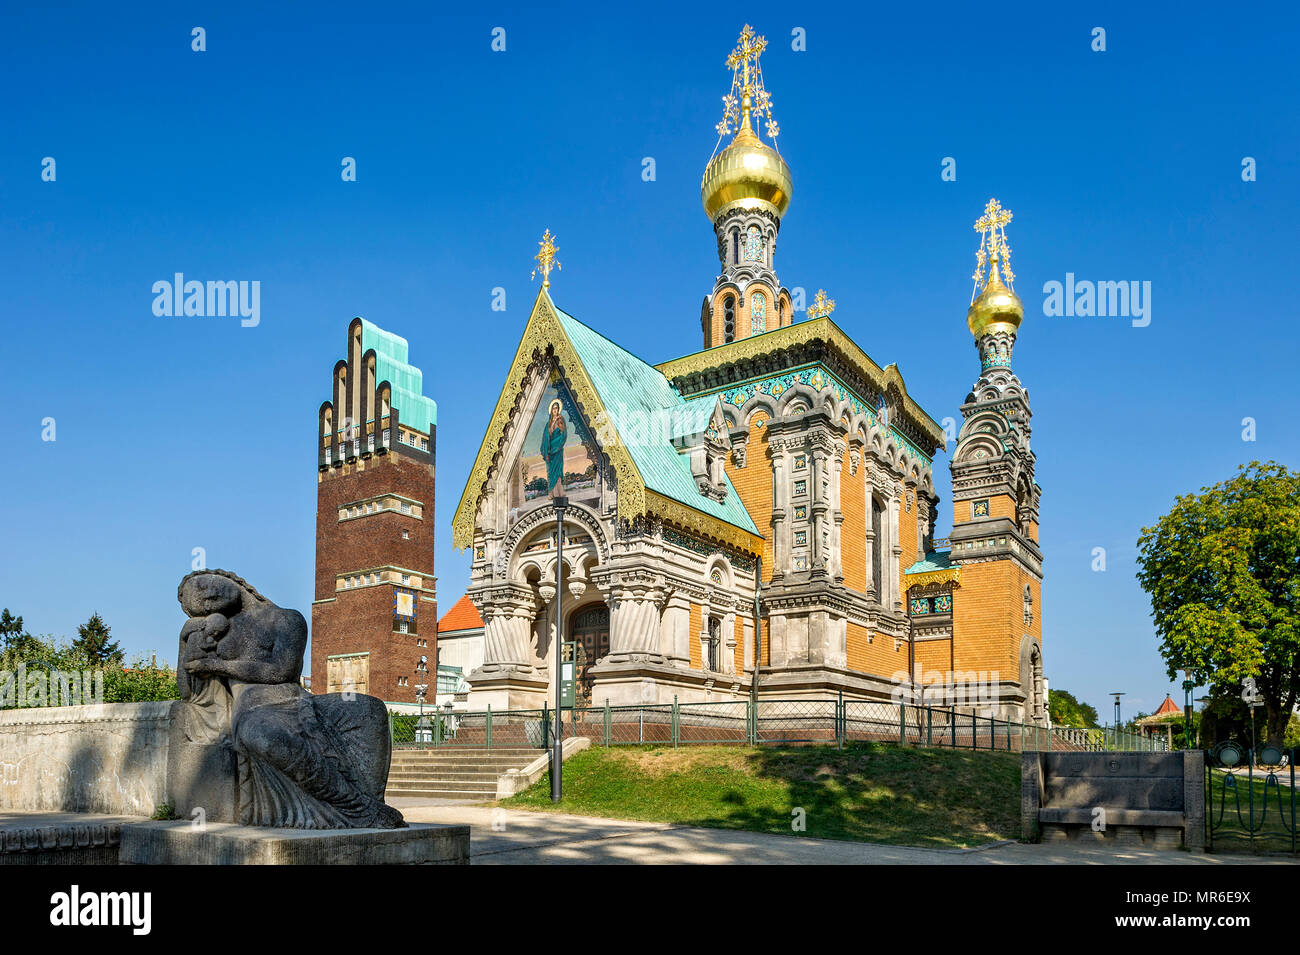 Russian Chapel of St. Mary Magdalene by Leonti Nikolayevich Benois, Wedding Tower, sculpture of Virgin Mary and Child by Stock Photo